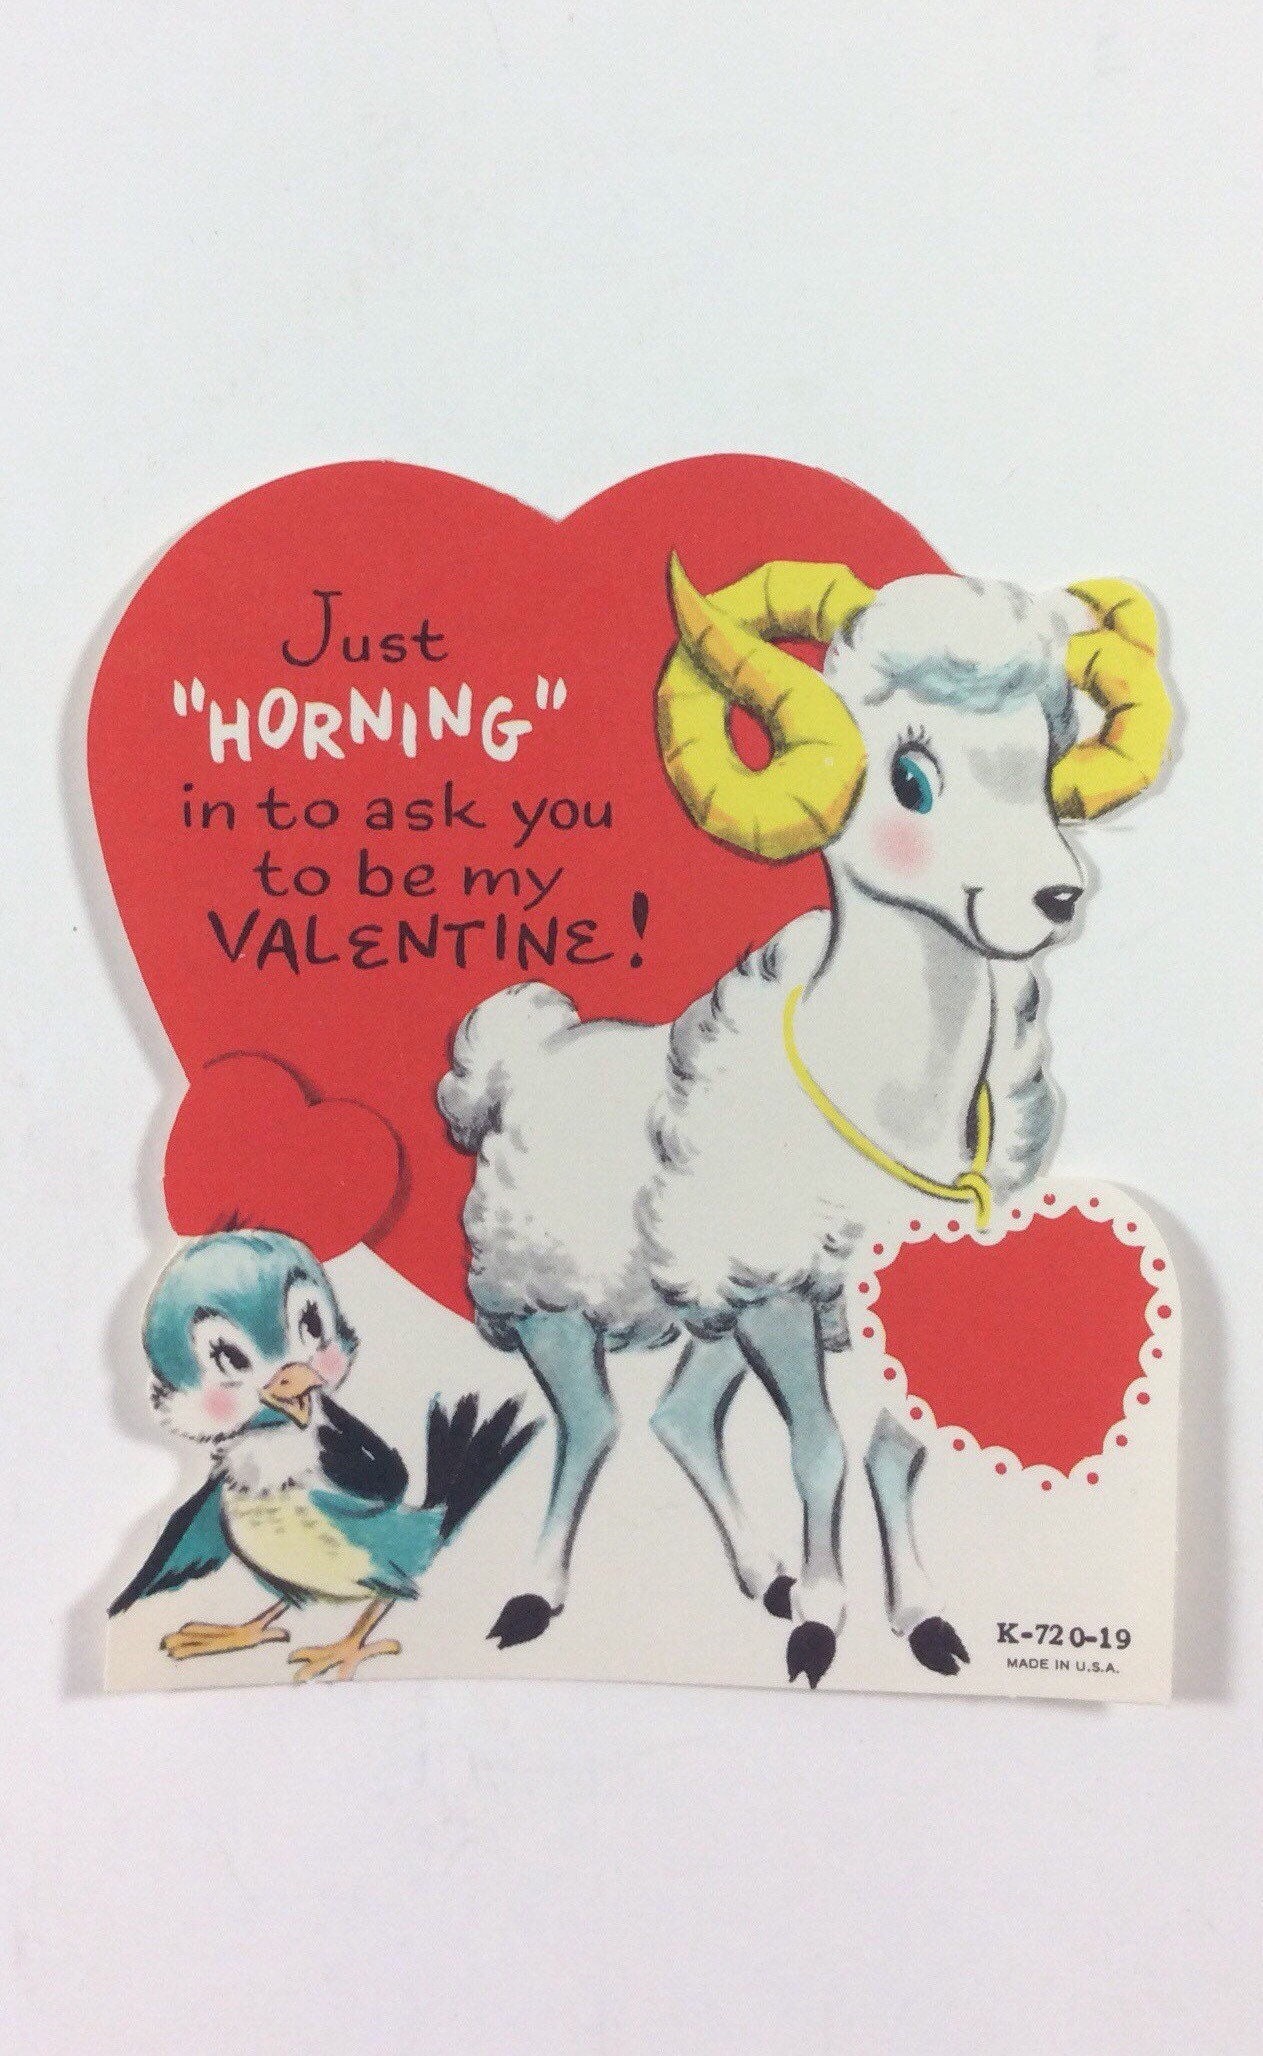 Ram Sheep With Horns & Blue Bird Vintage 1950S Unused American Greetings Valentine Novelty Greeting Day Card